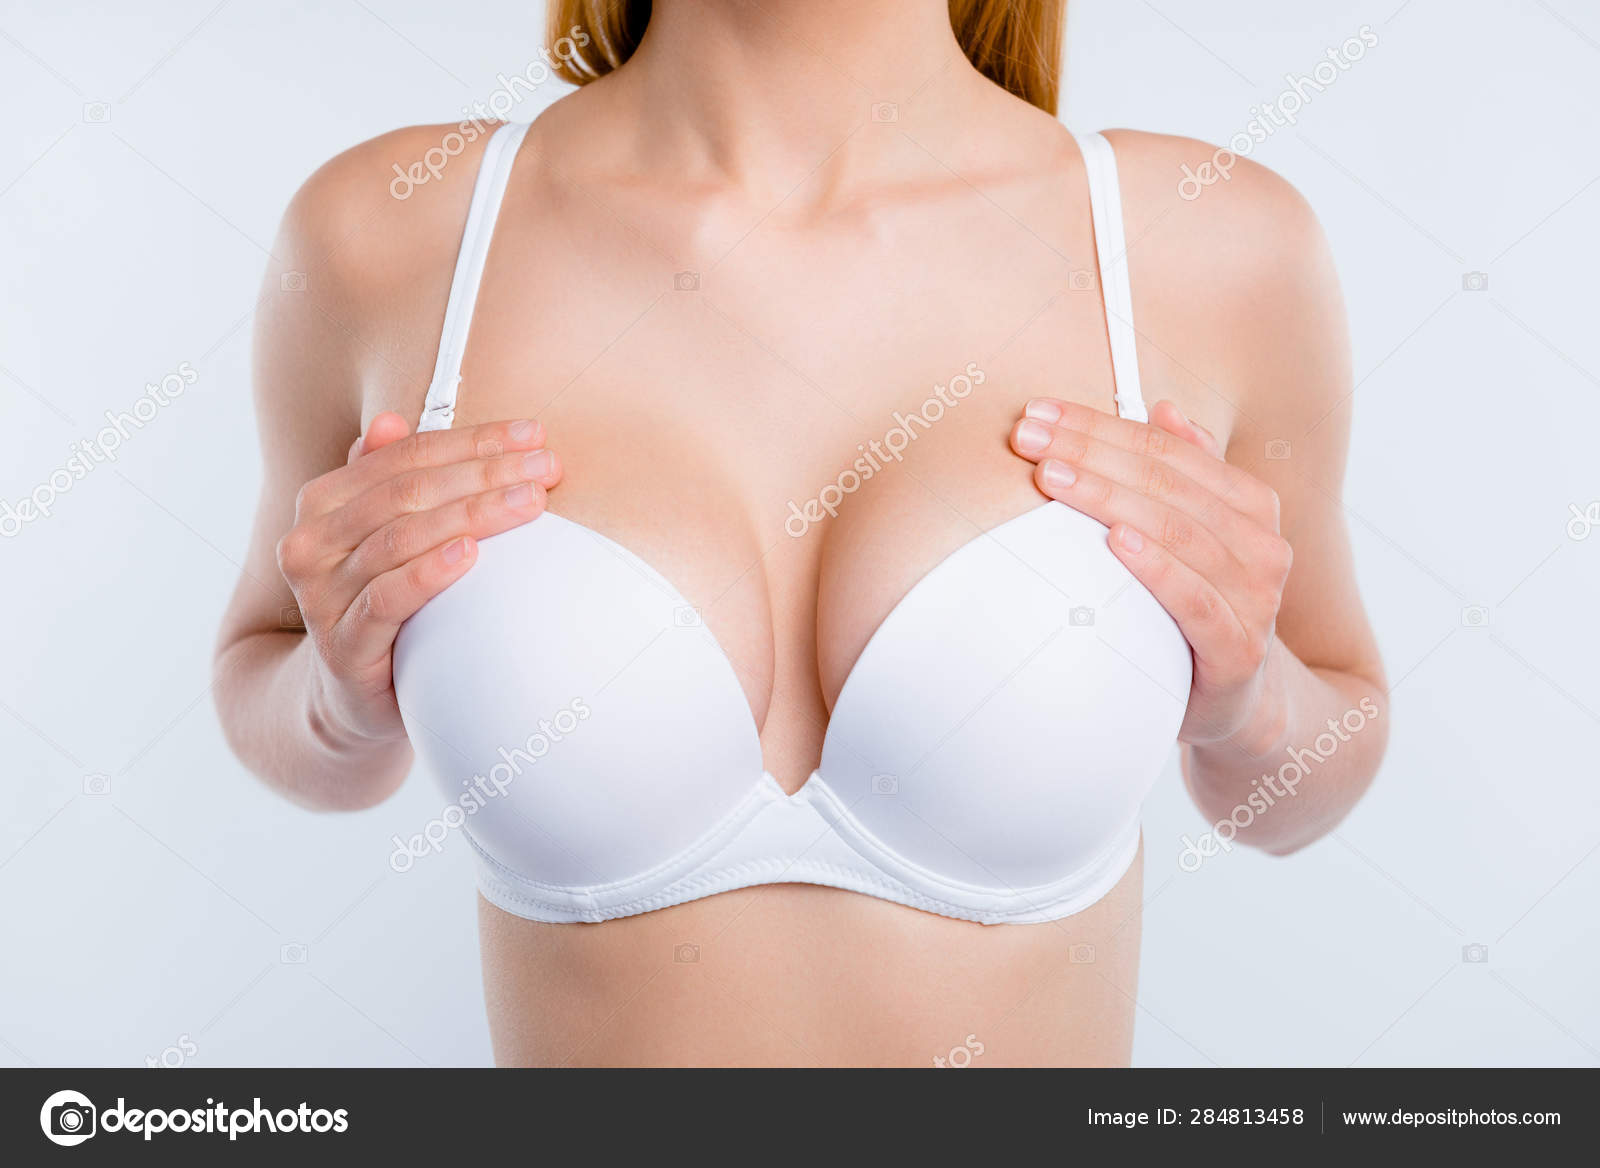 Young Woman Unhappy With Her Breast Shape Reflection in the Mirror,  Close-Up, Medical Stock Footage ft. bra & ideal - Envato Elements